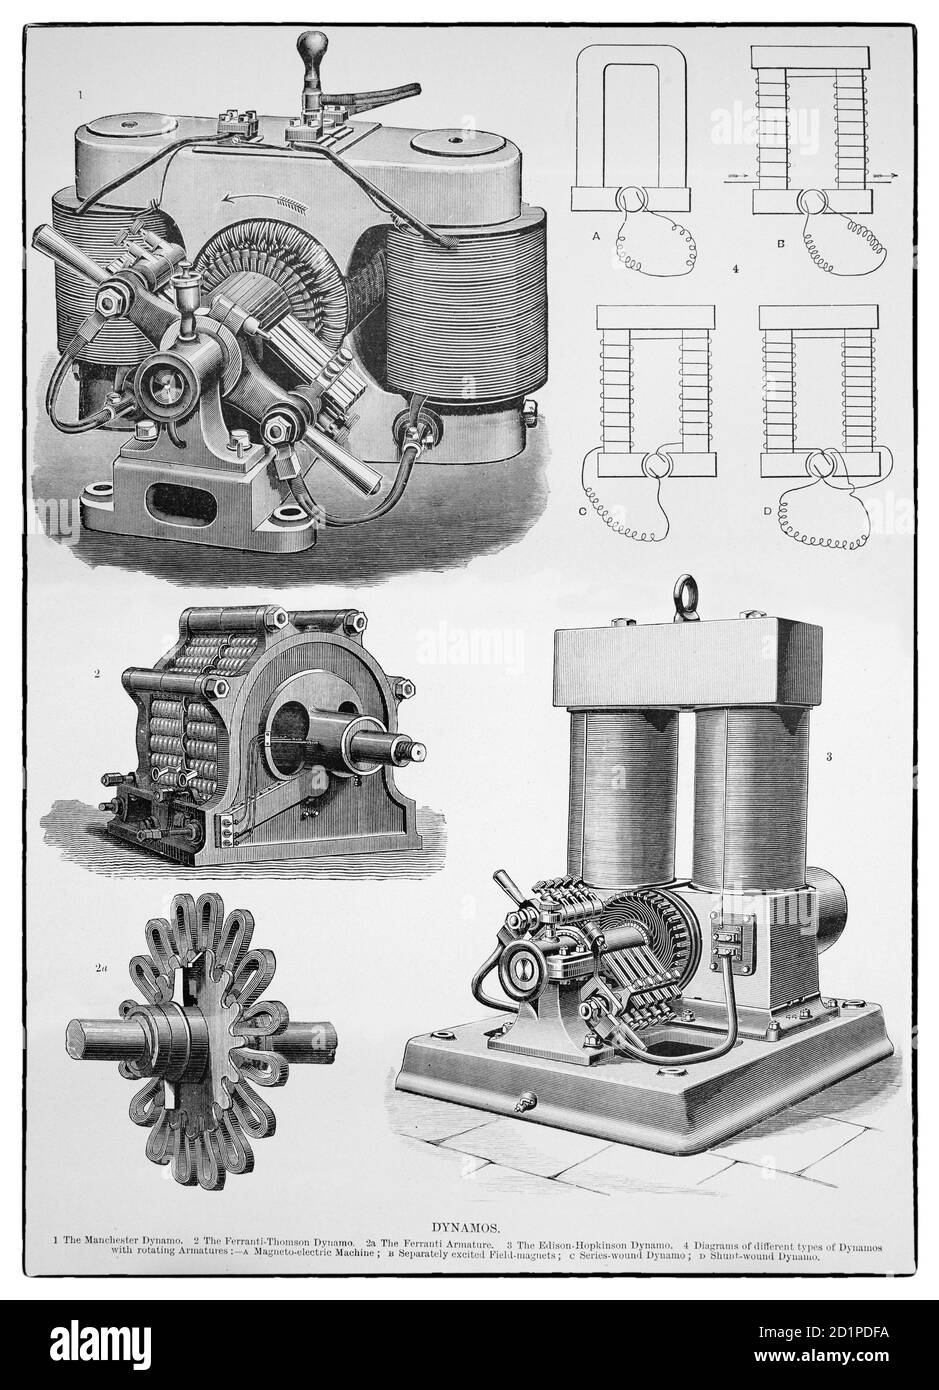 A 19th Century collage of Various dynamos used for converting mechanical  motion into electricity, generating direct current using a commutator.  Dynamos were the first electrical generators capable of delivering power  for industry,